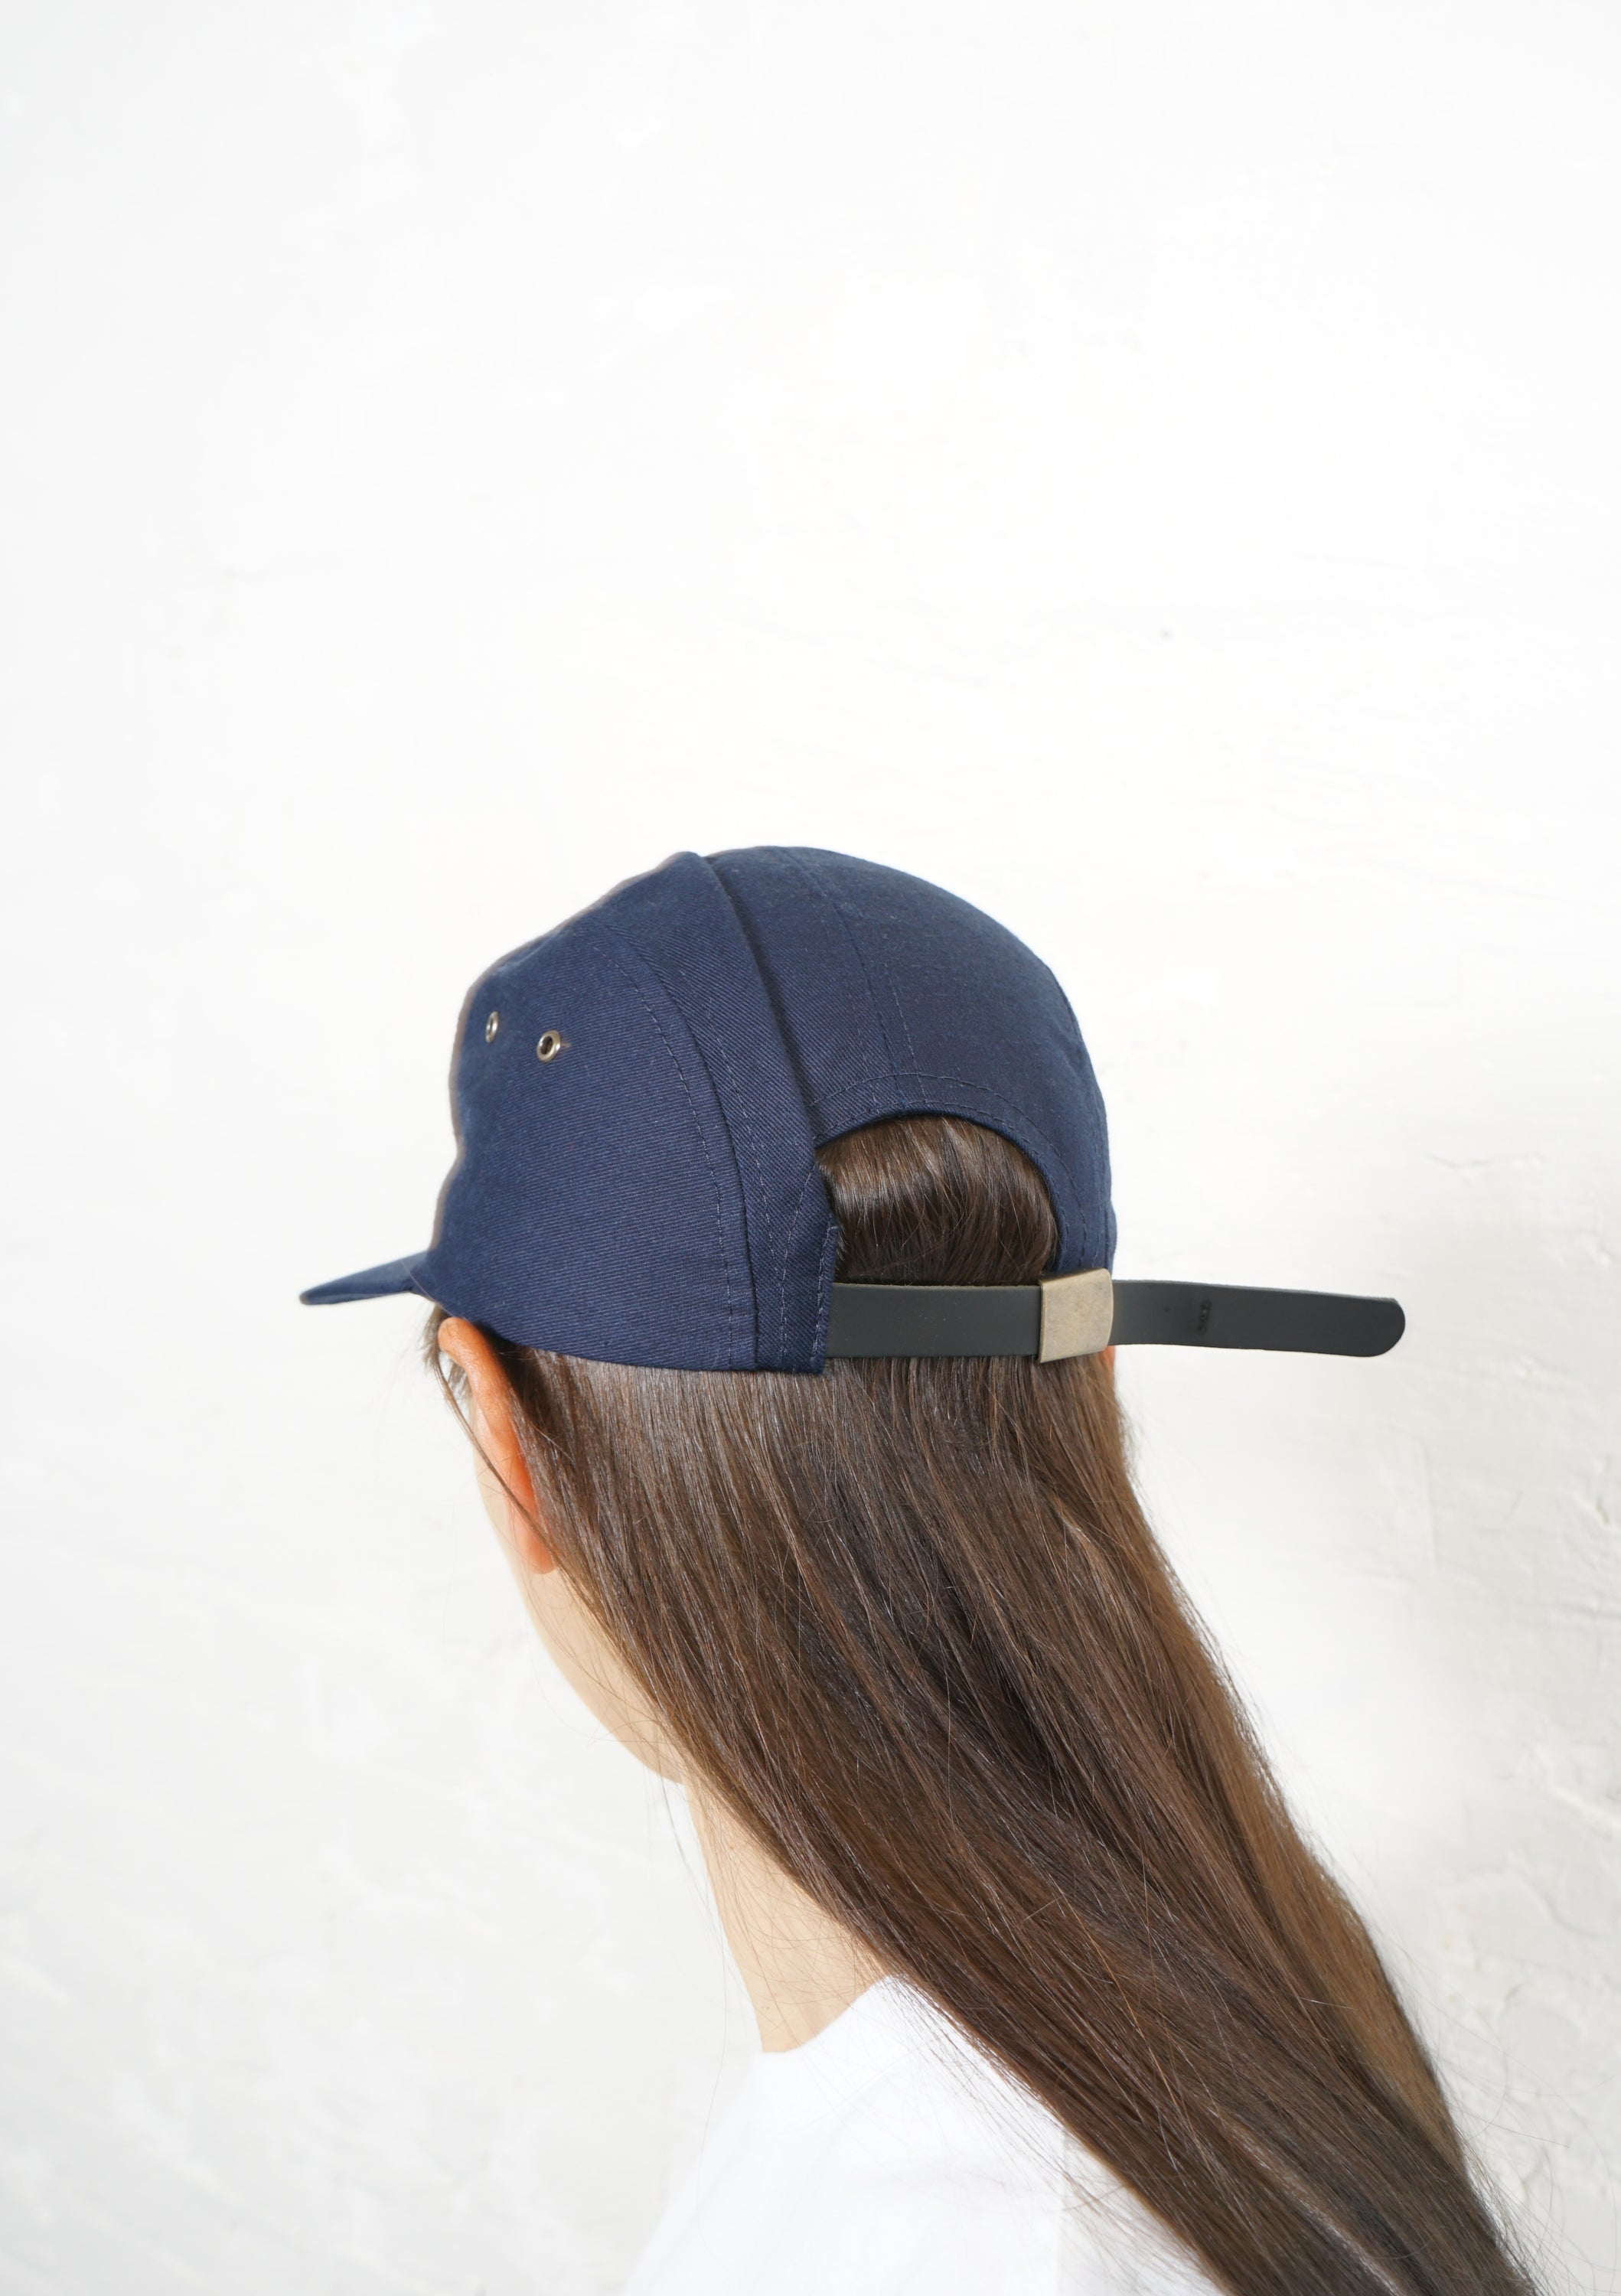 5-Panel Cap Made in USA Navy